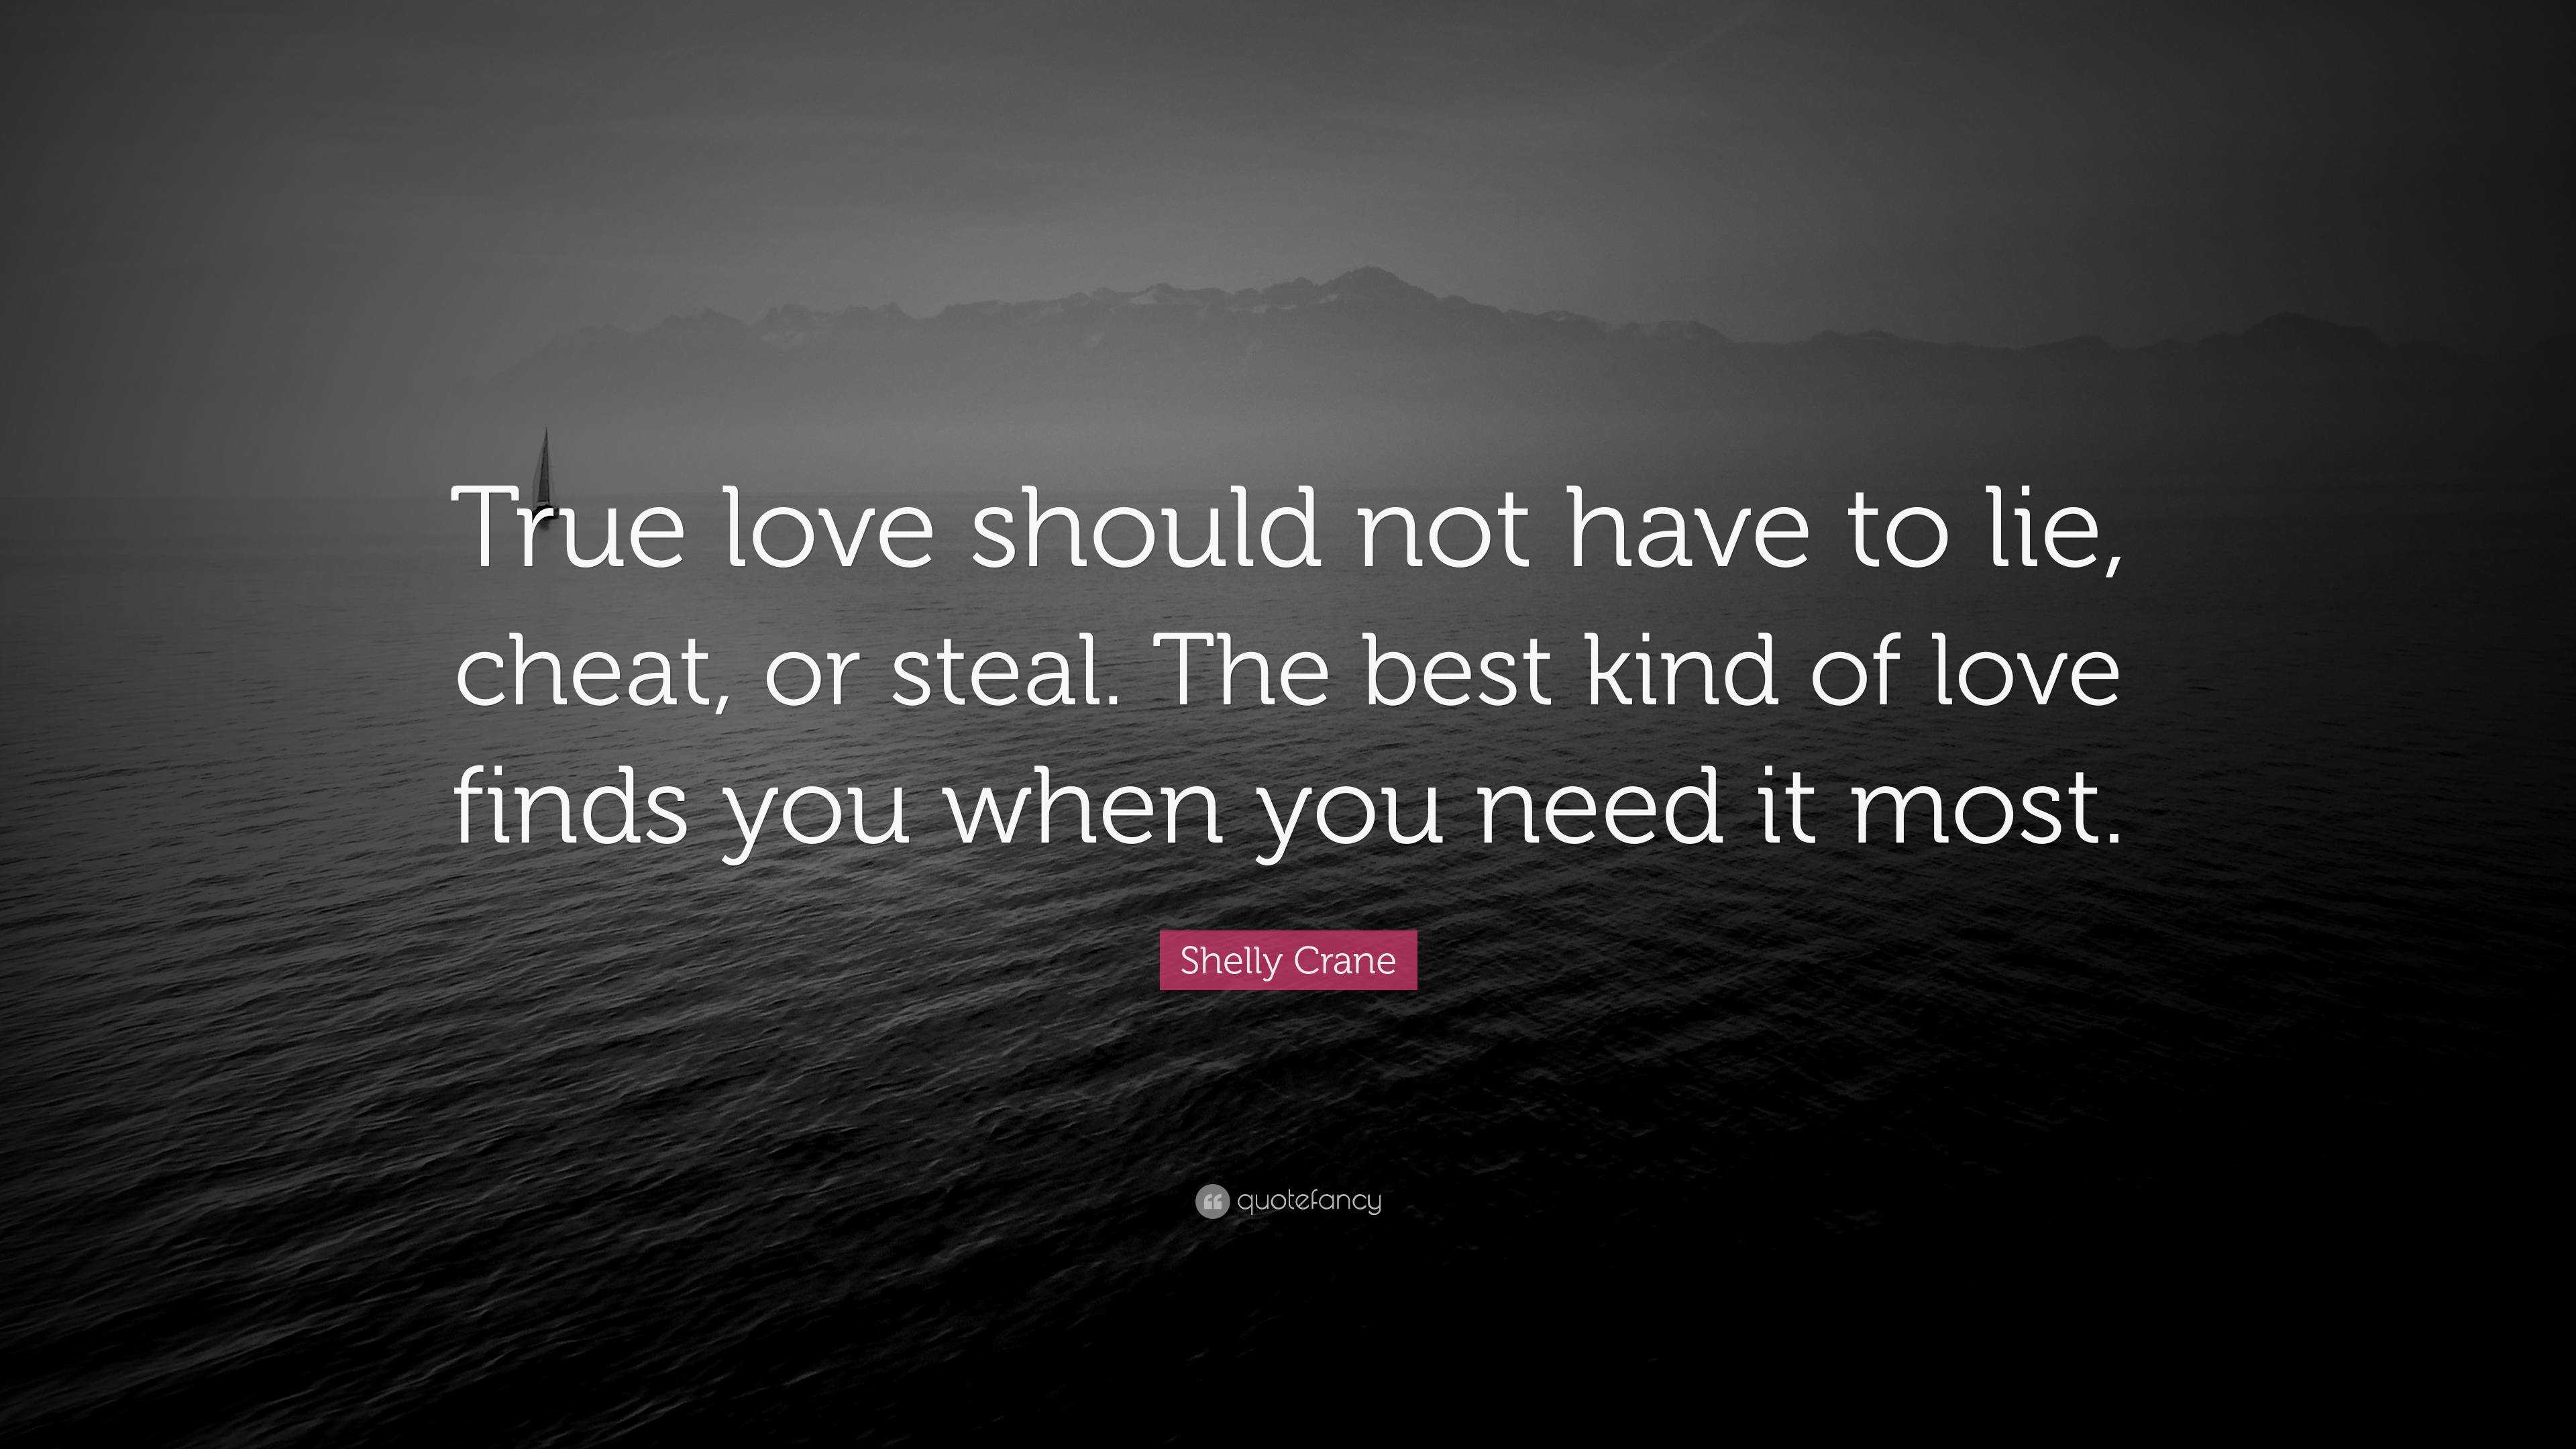 Shelly Crane Quote: “True love should not have to lie, cheat, or steal. The  best kind